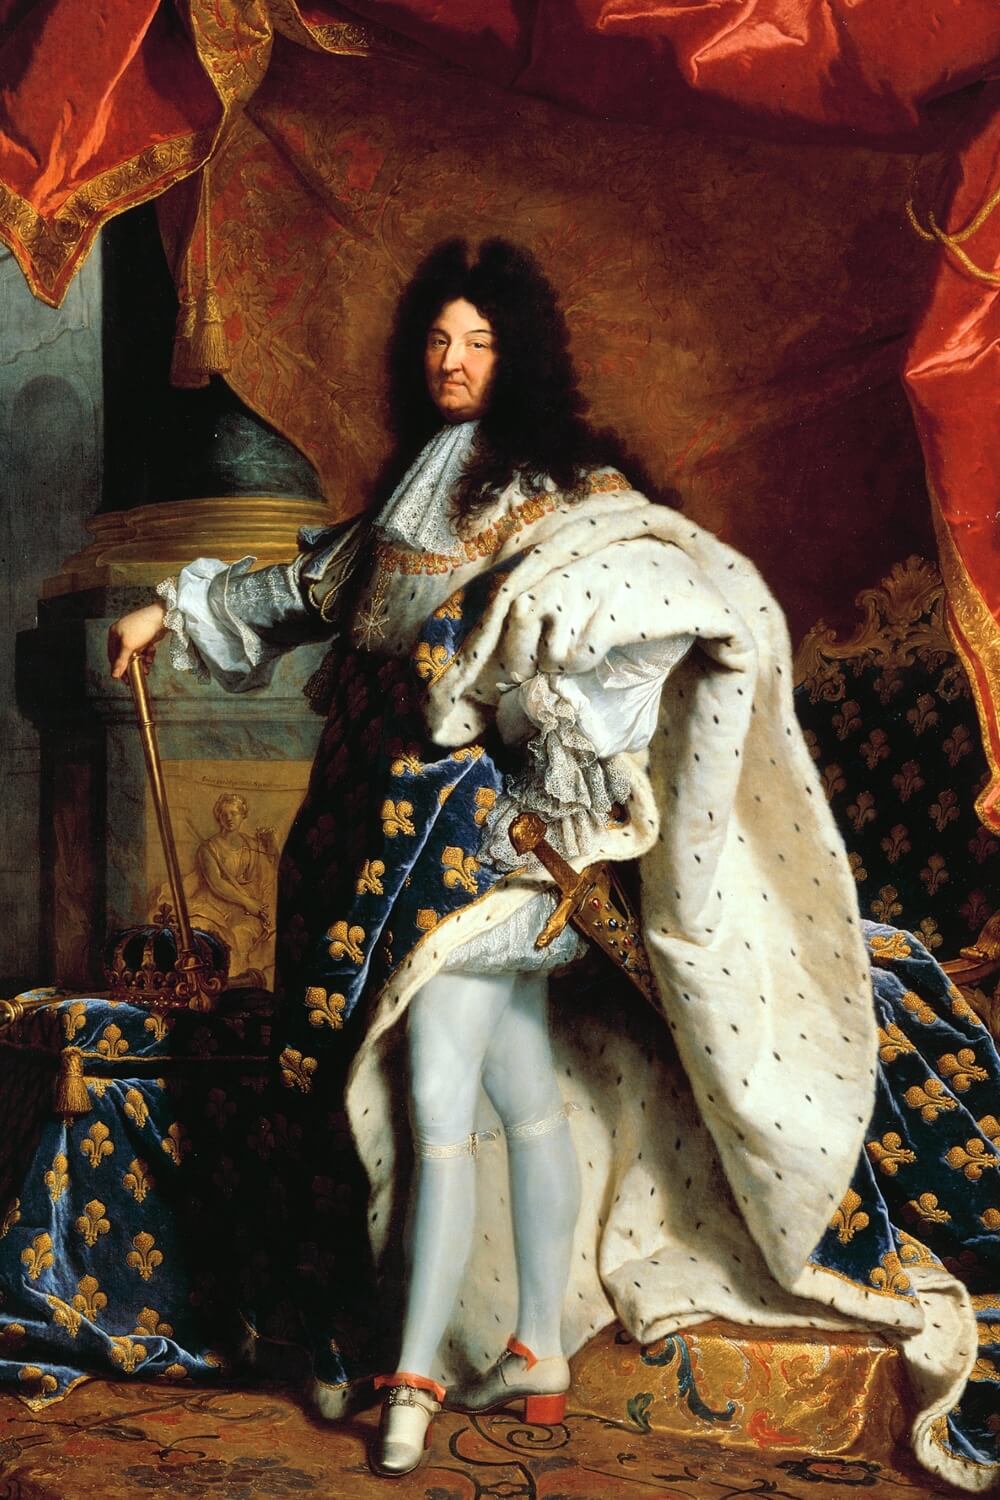 King Louis XIV at age 68 by Hyacinthe Rigaud (1701)